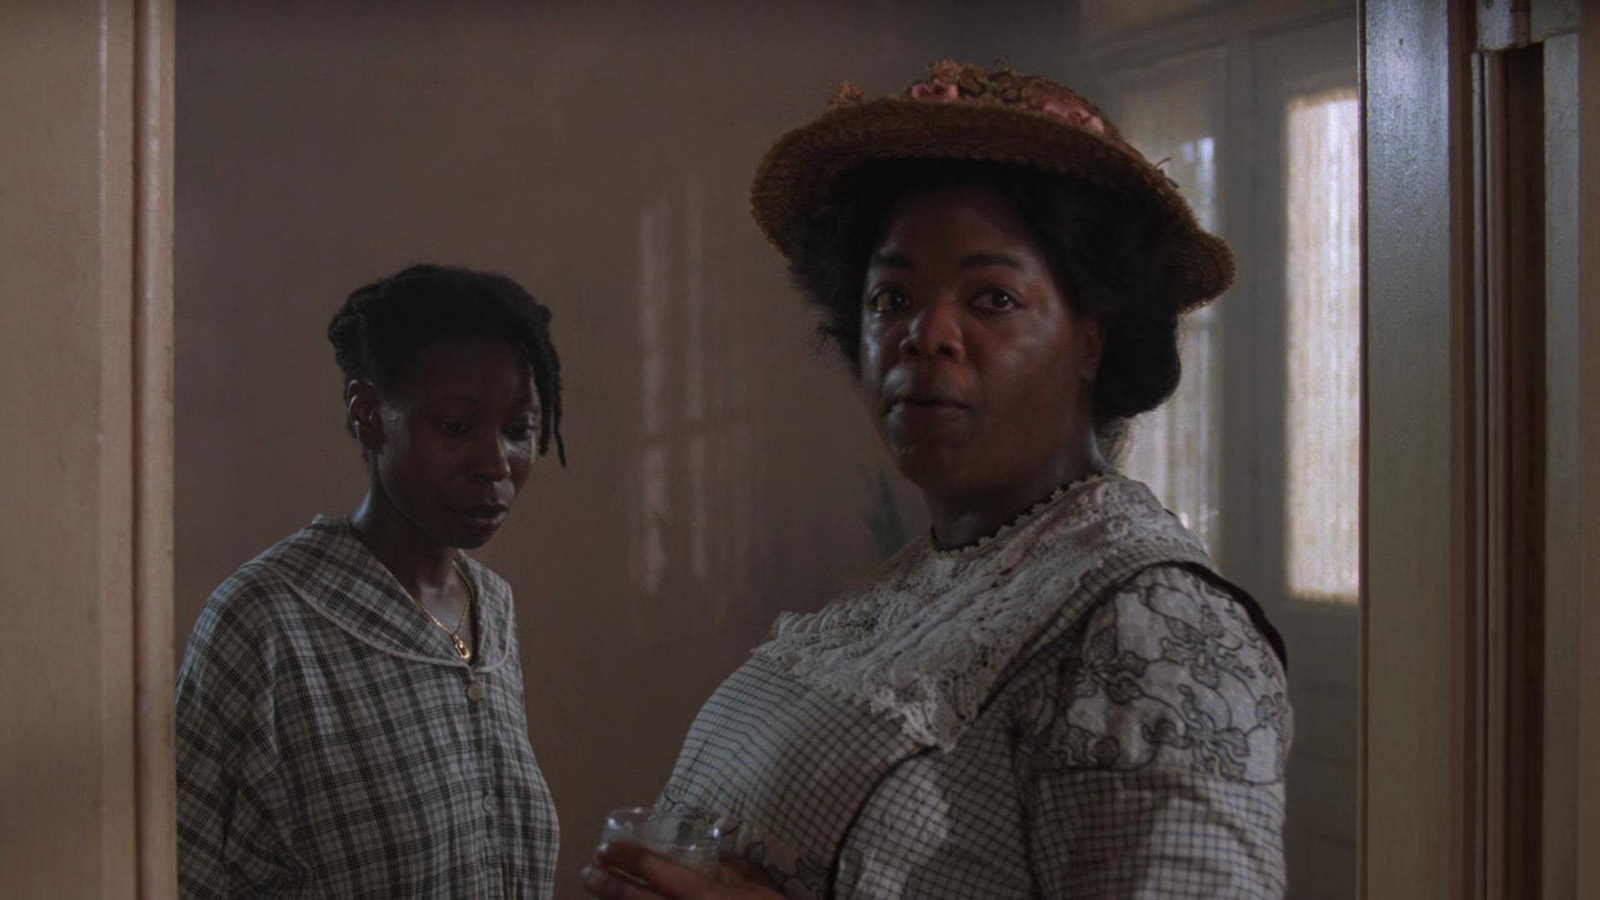 The Color Purple (1985) was Oprah’s film debut. Now she’s a co-producer on the 2023 version. Image © Warner Bros. Pictures